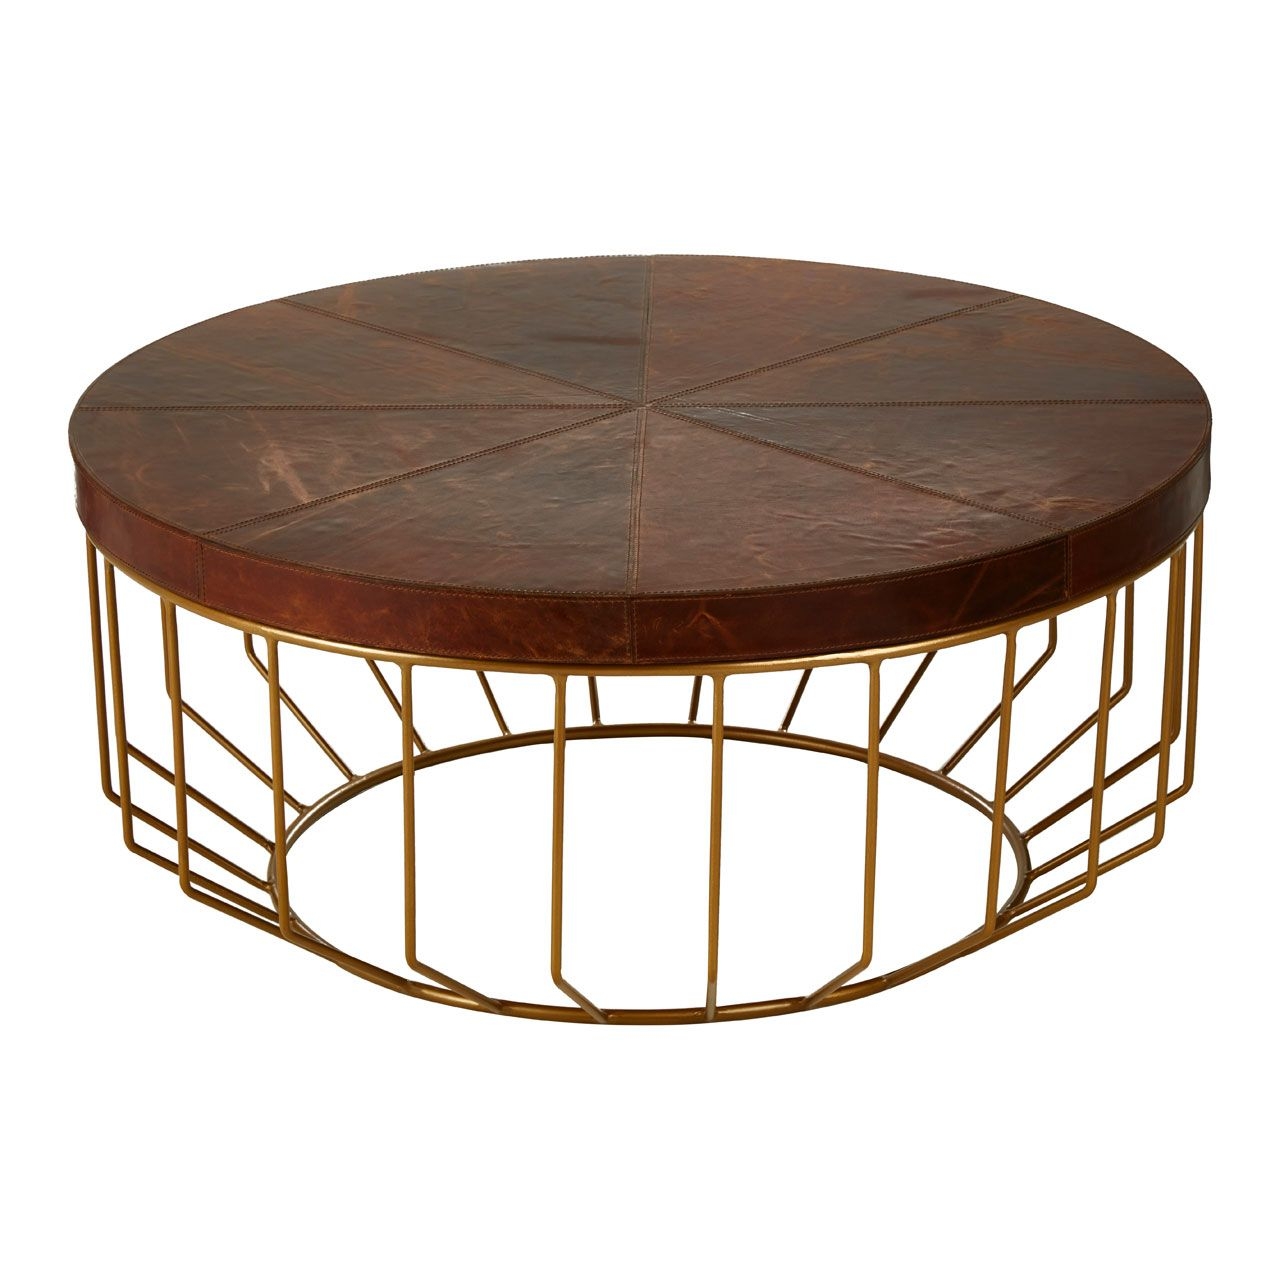 Kensington Townhouse Round Wooden Coffee Table In Brown